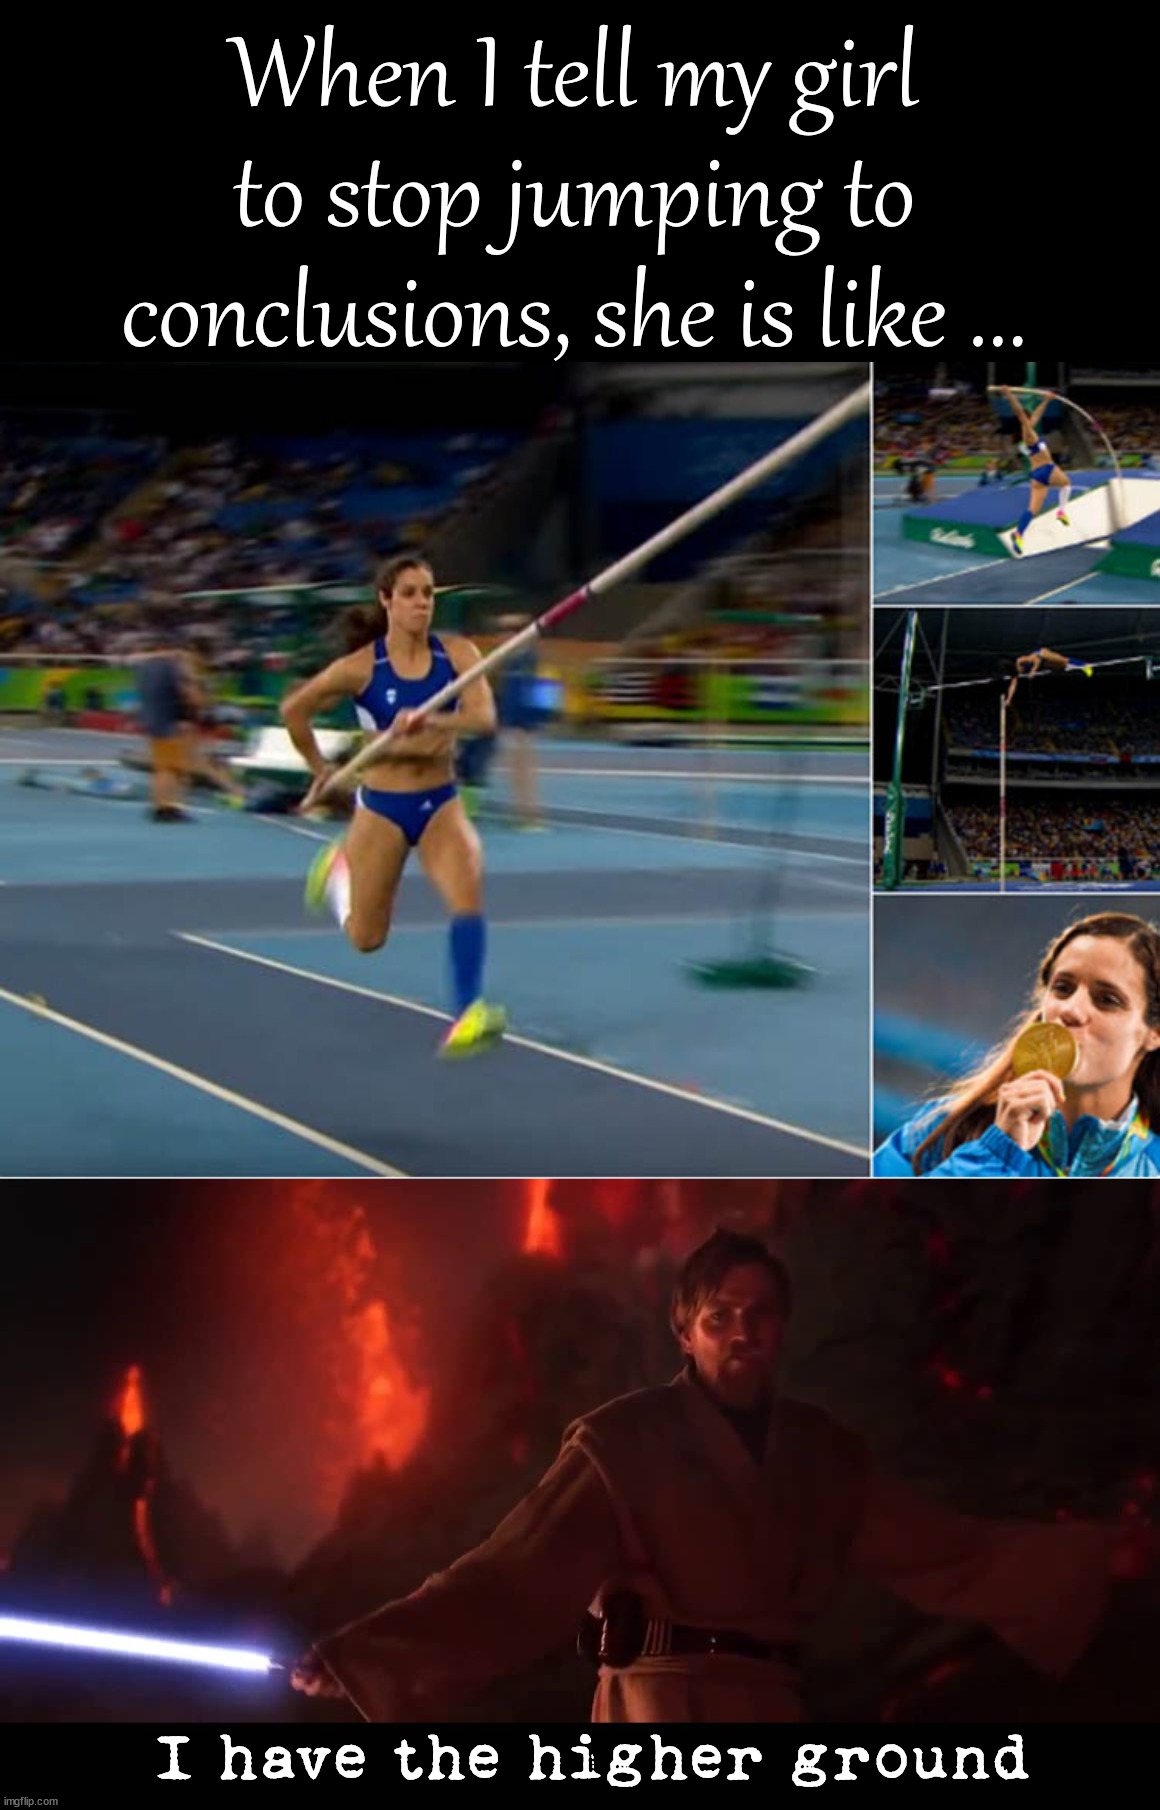 She gets the Gold for jumping to conclusions | When I tell my girl to stop jumping to conclusions, she is like ... I have the higher ground | image tagged in higher ground,conclusions,jumping | made w/ Imgflip meme maker